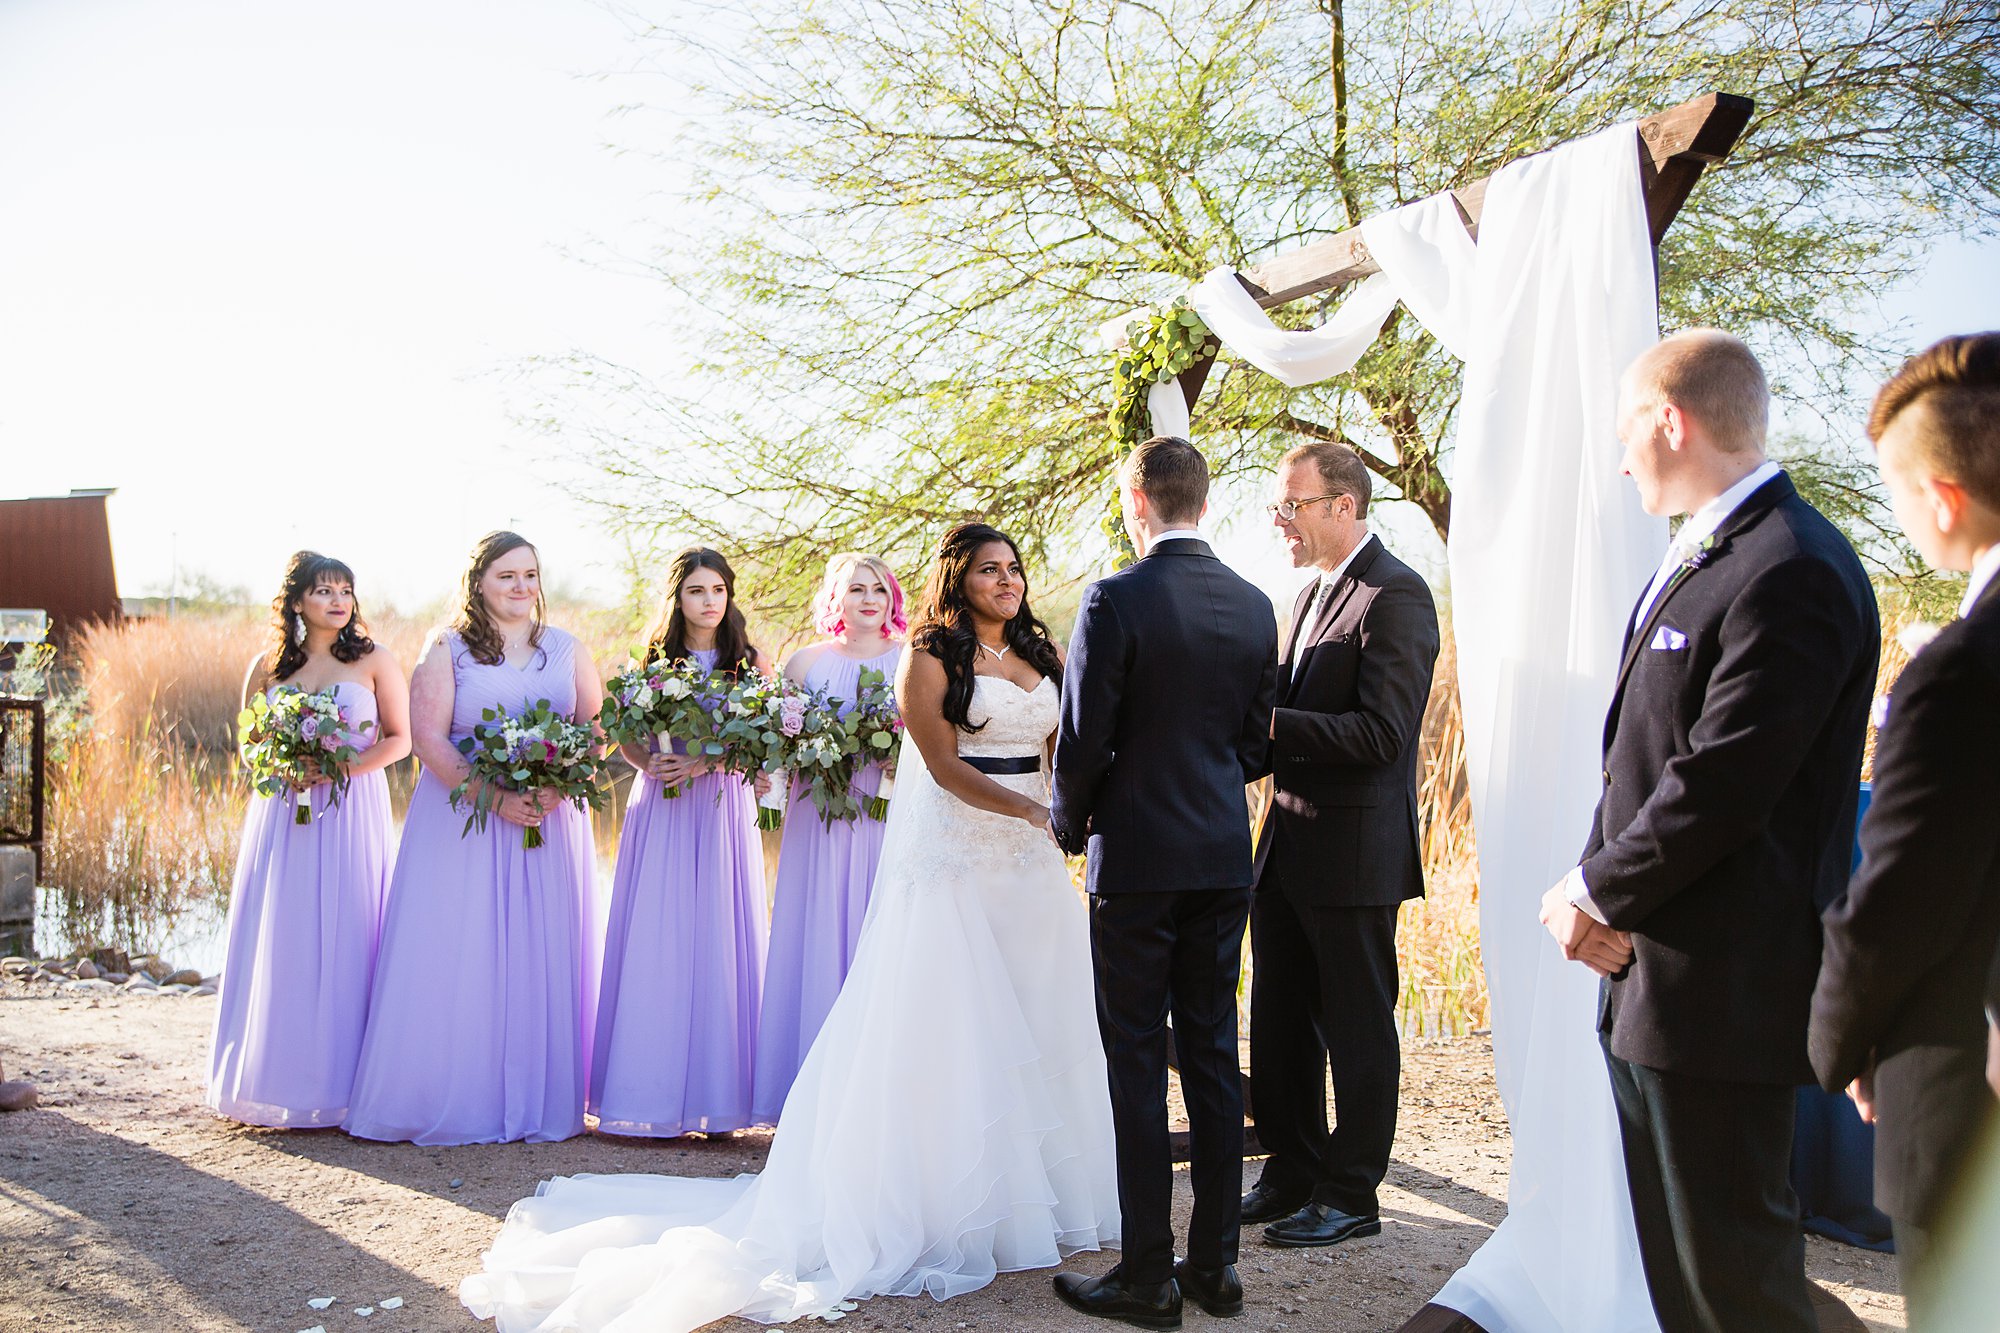 Bride and groom at the altar surrounded by bridesmaids and groomsmen during wedding ceremony at the Rio Salado Audubon by Phoenix wedding photographers PMA Photography.